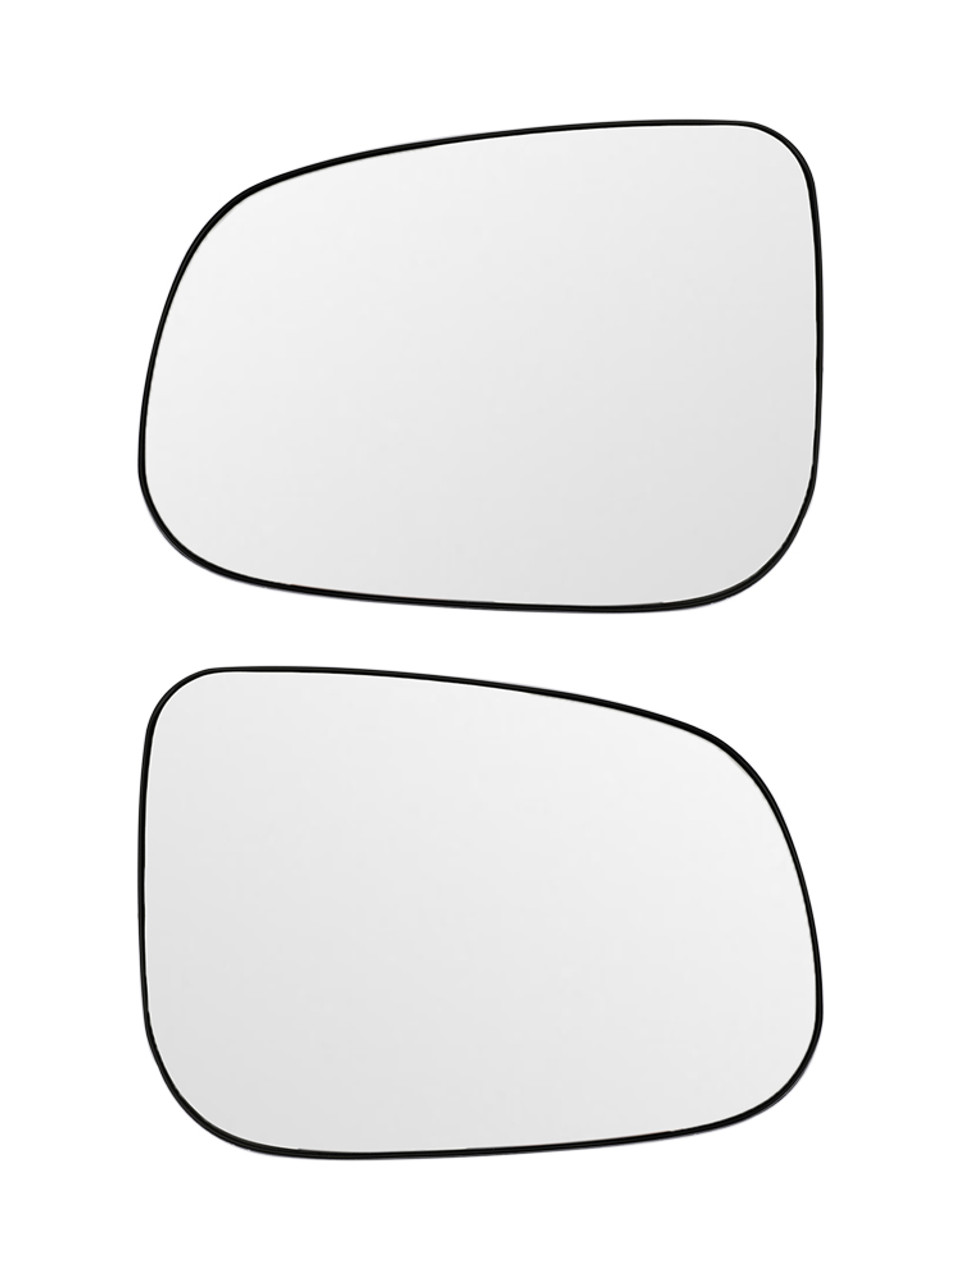 2pcs Side View Mirror Glass for Volvo S60 S80 V60 2011-18 30716923 30716924